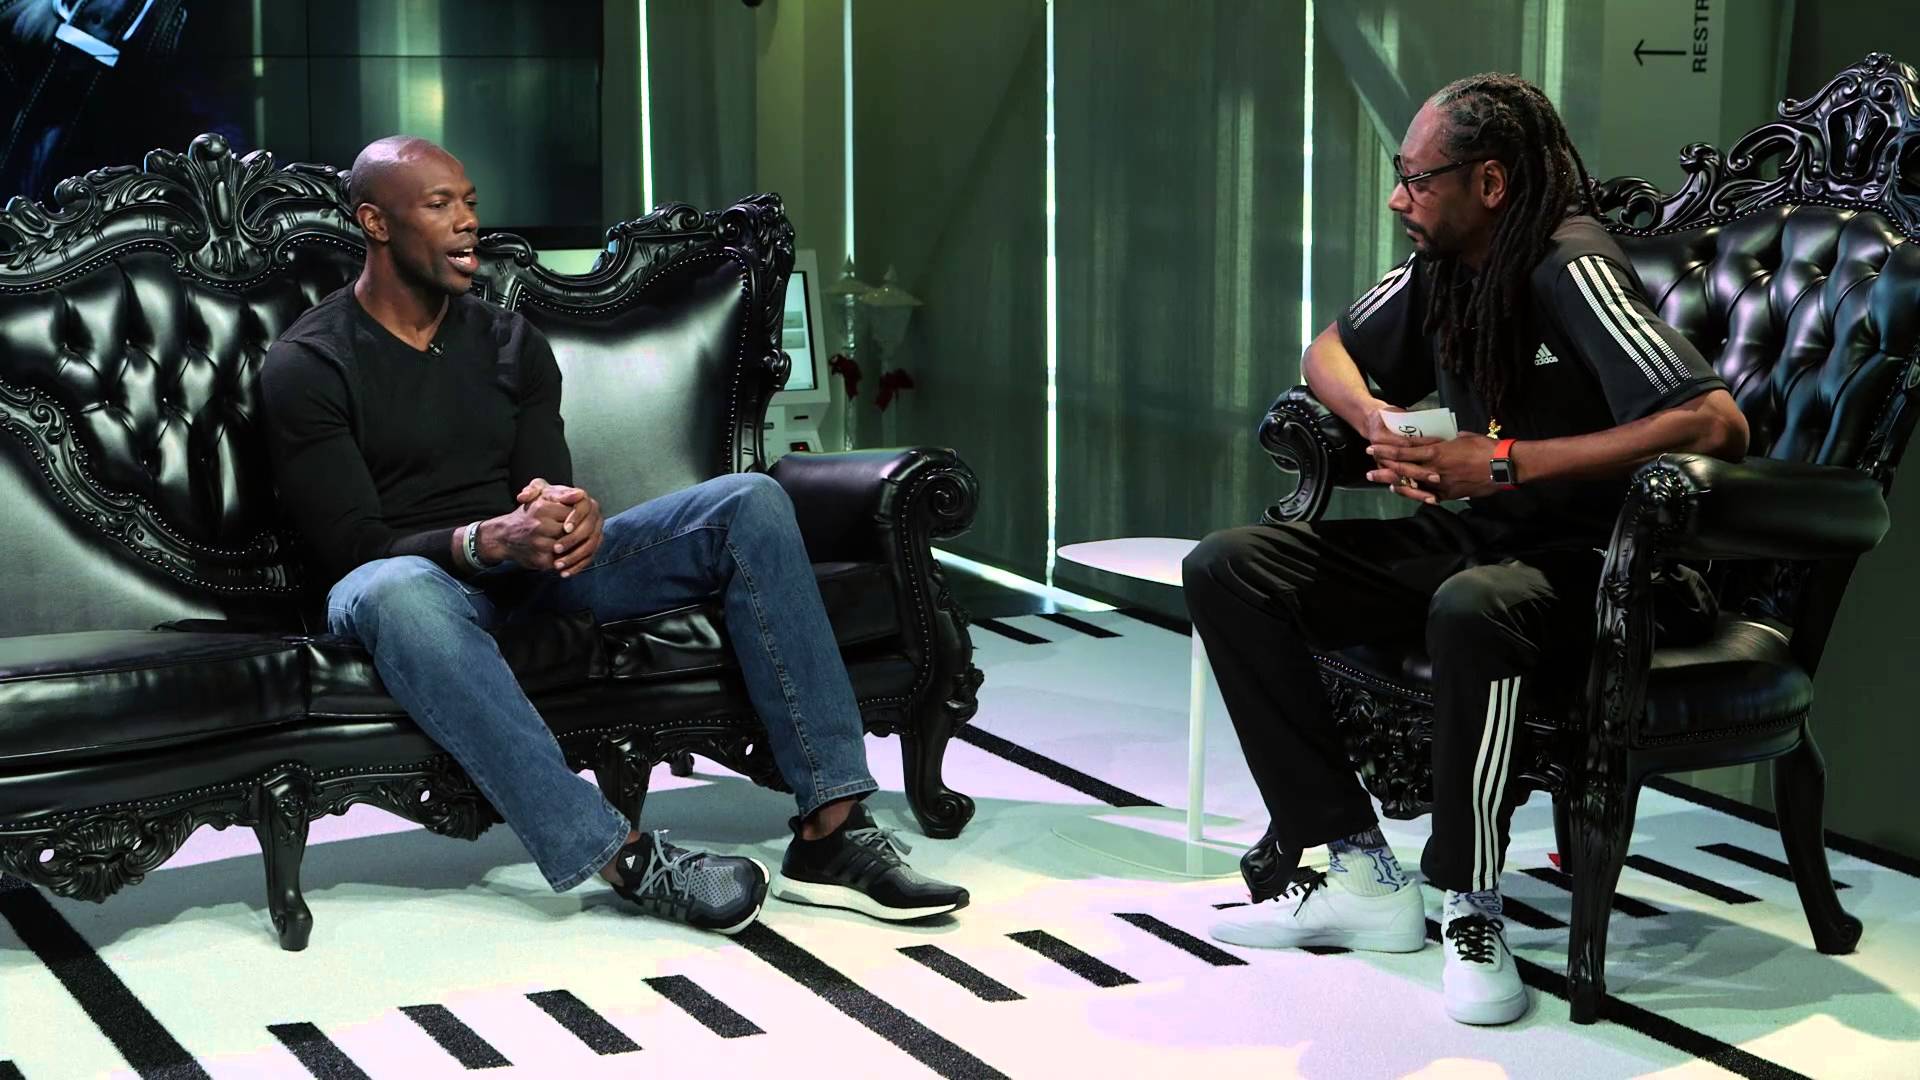 Snoop Dogg interviews Terrell Owens for show 